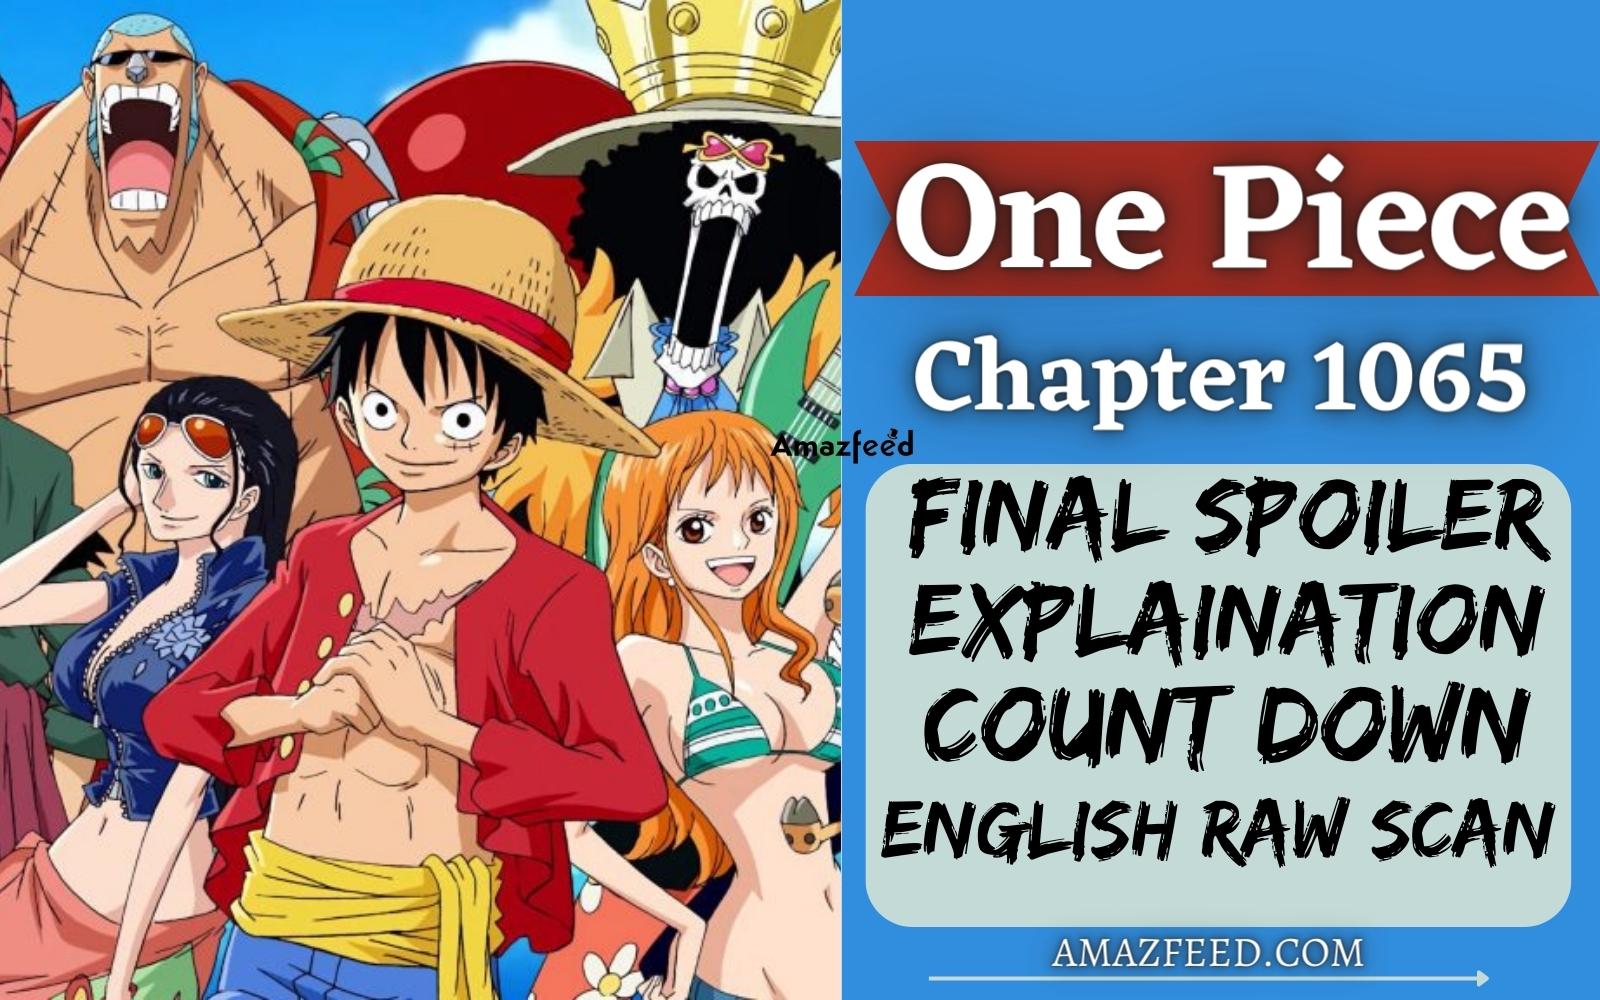 One Piece Chapter 1065 Final Reddit Spoilers Explaination, Count Down, English Raw Scan, Release Date